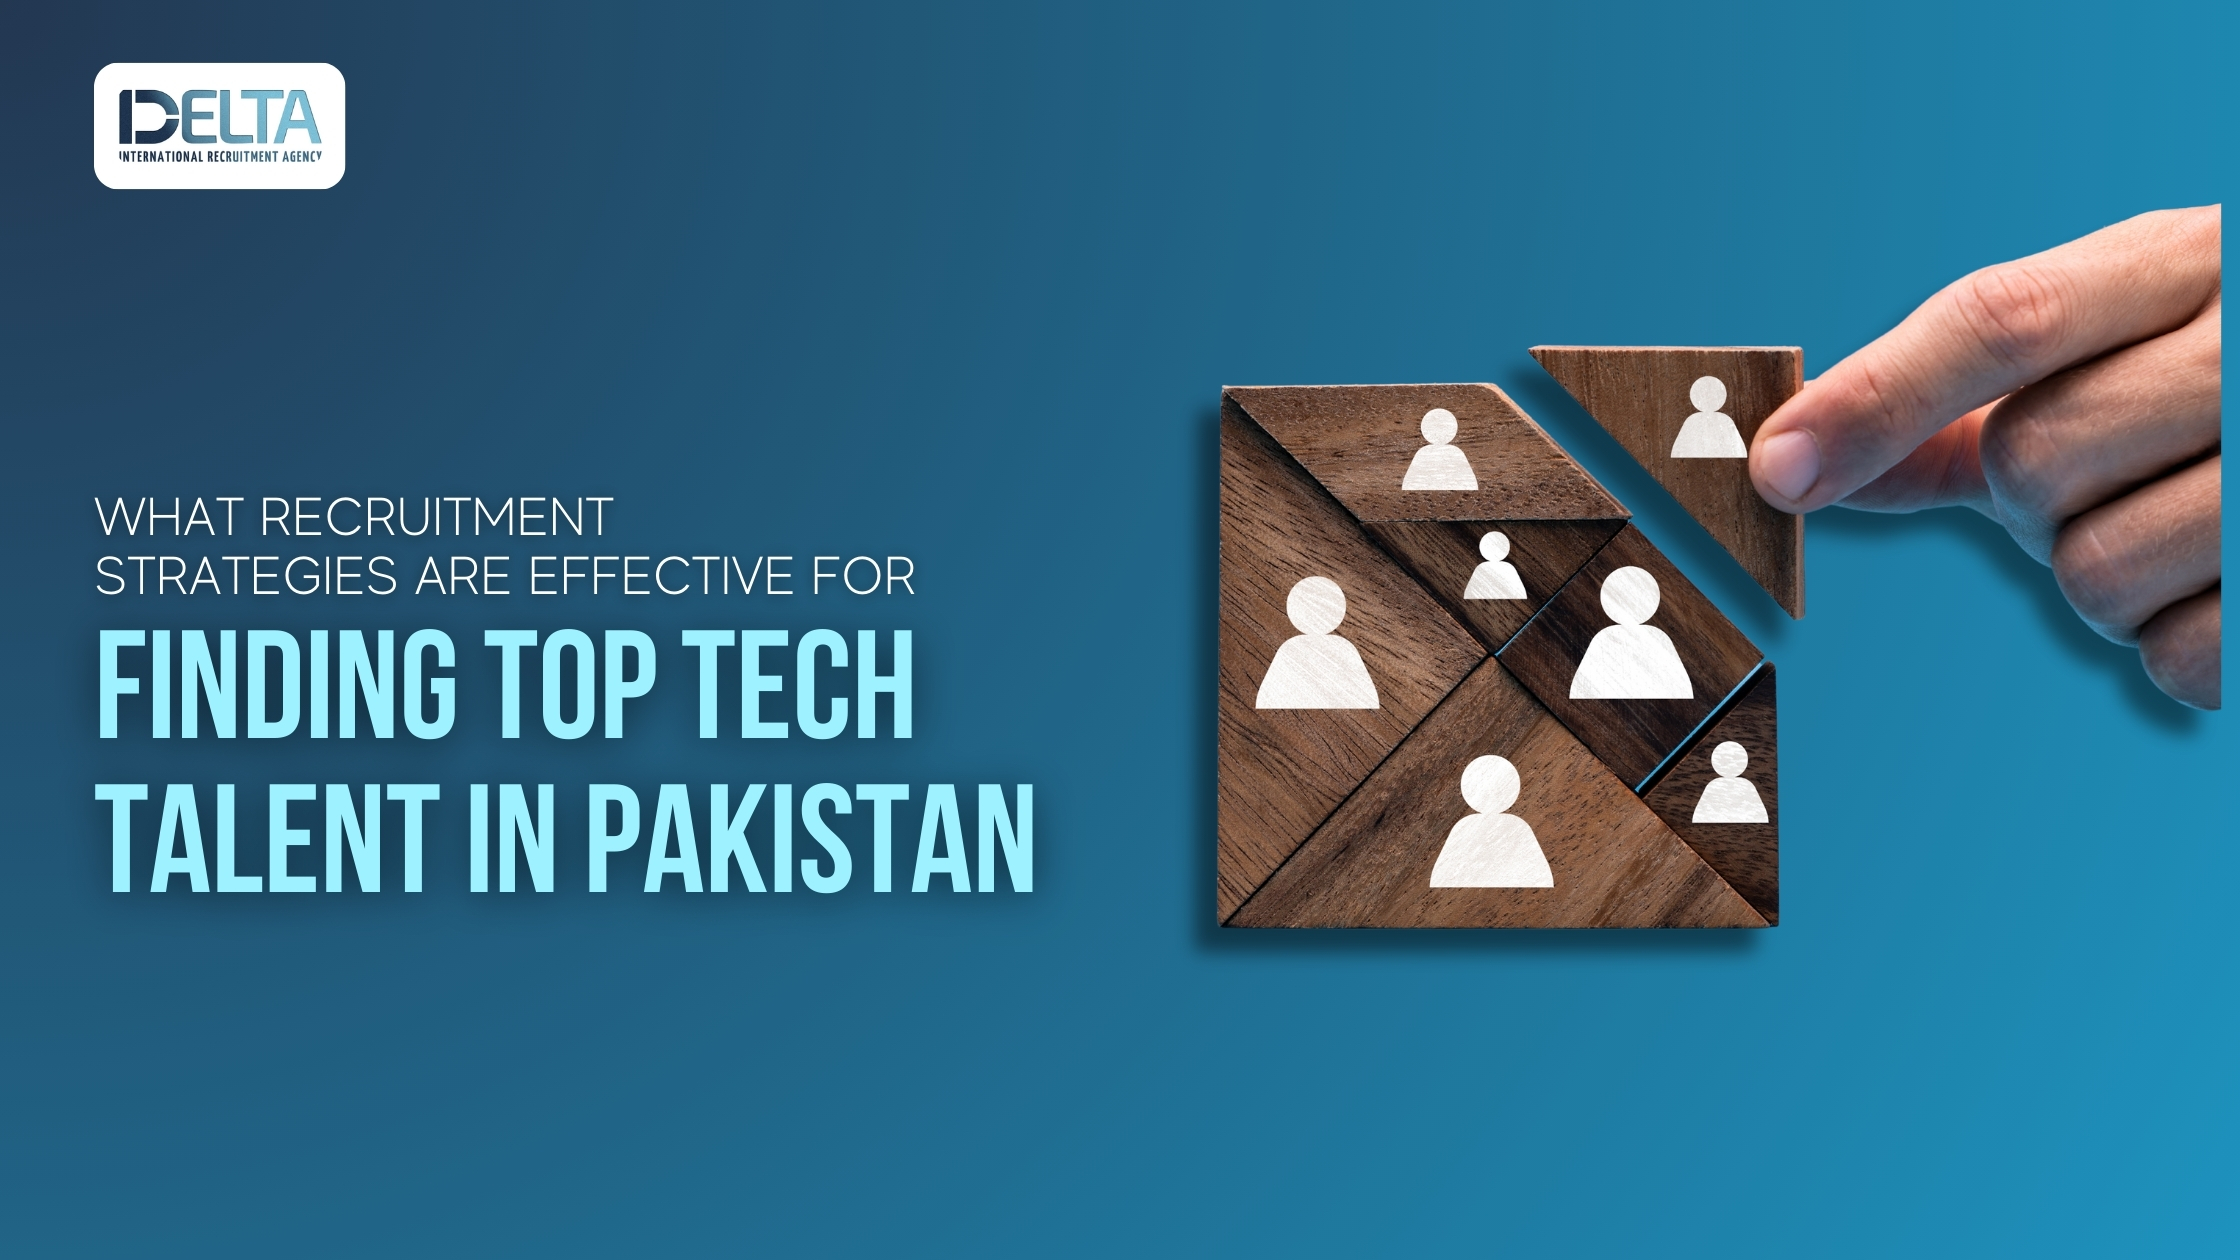 What Recruitment Strategies Are Effective for Finding Top Tech Talent in Pakistan?